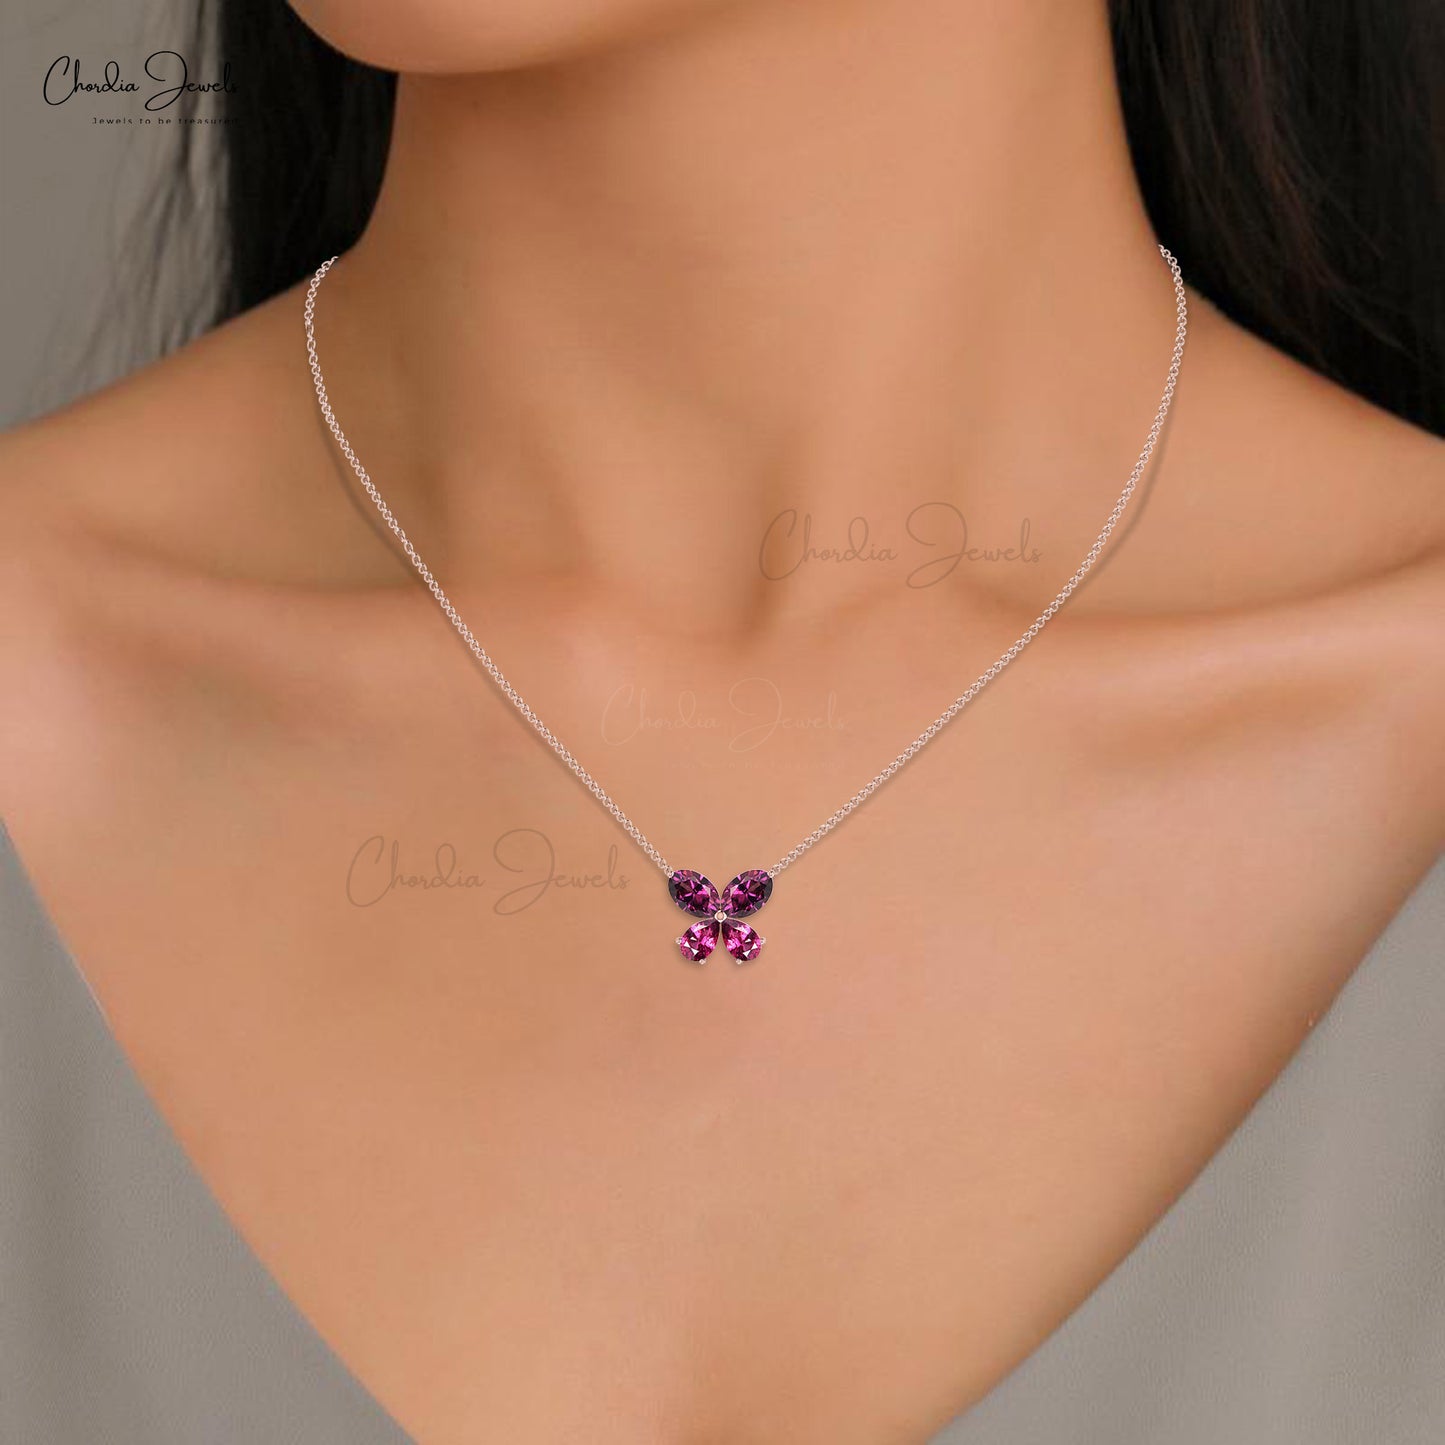 Classical Butterfly Natural Rhodolite Garnet Necklace Pendant Newest Popular Oval Shape January Birthstone Gemstone Necklace in 14k Pure Gold Gift For Her